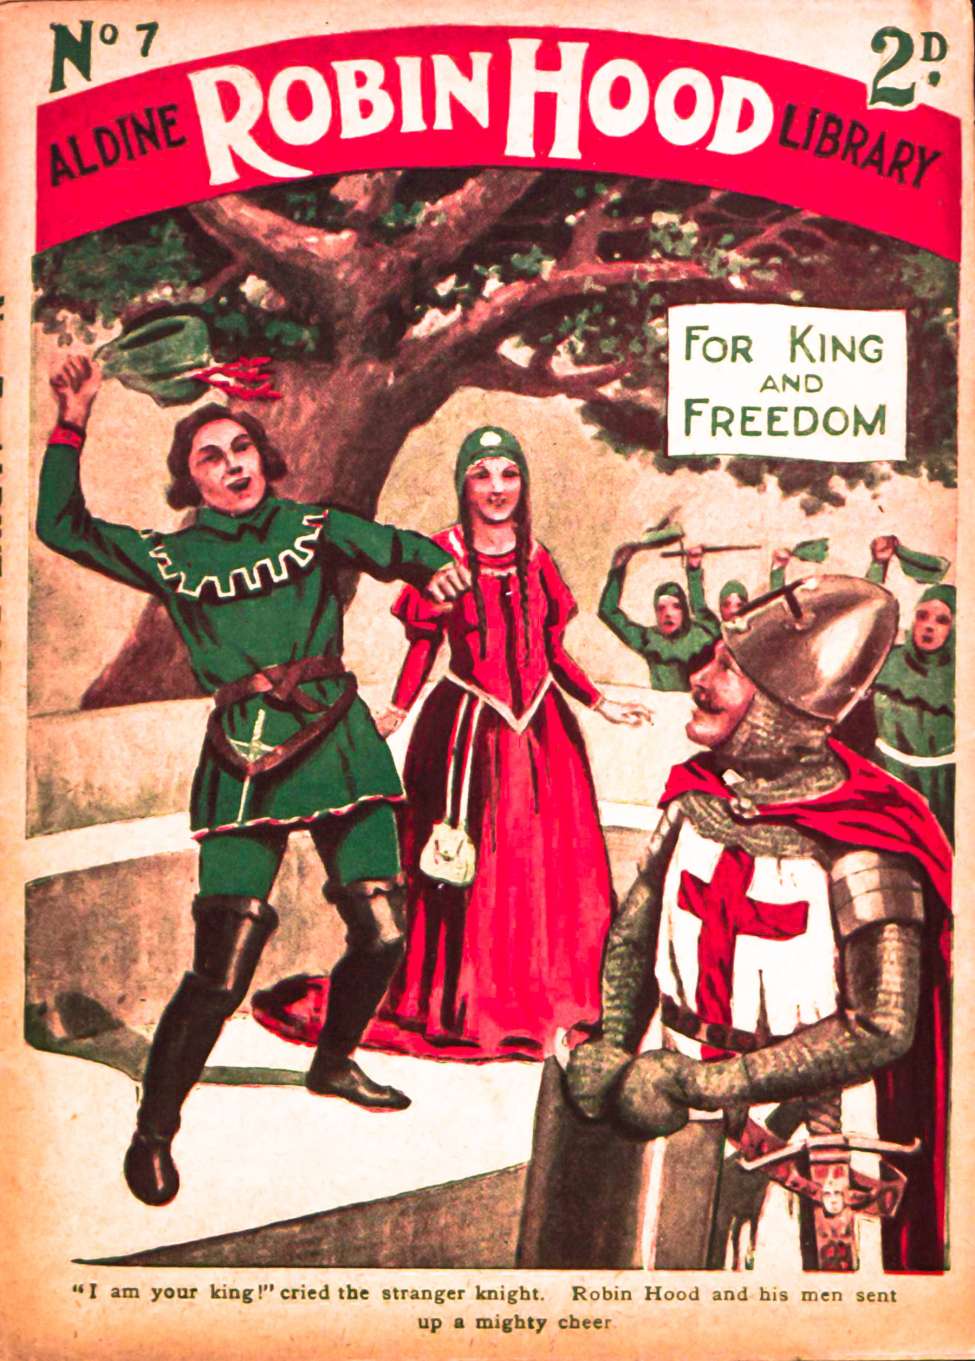 Book Cover For Aldine Robin Hood Library 7 - For King and Freedom